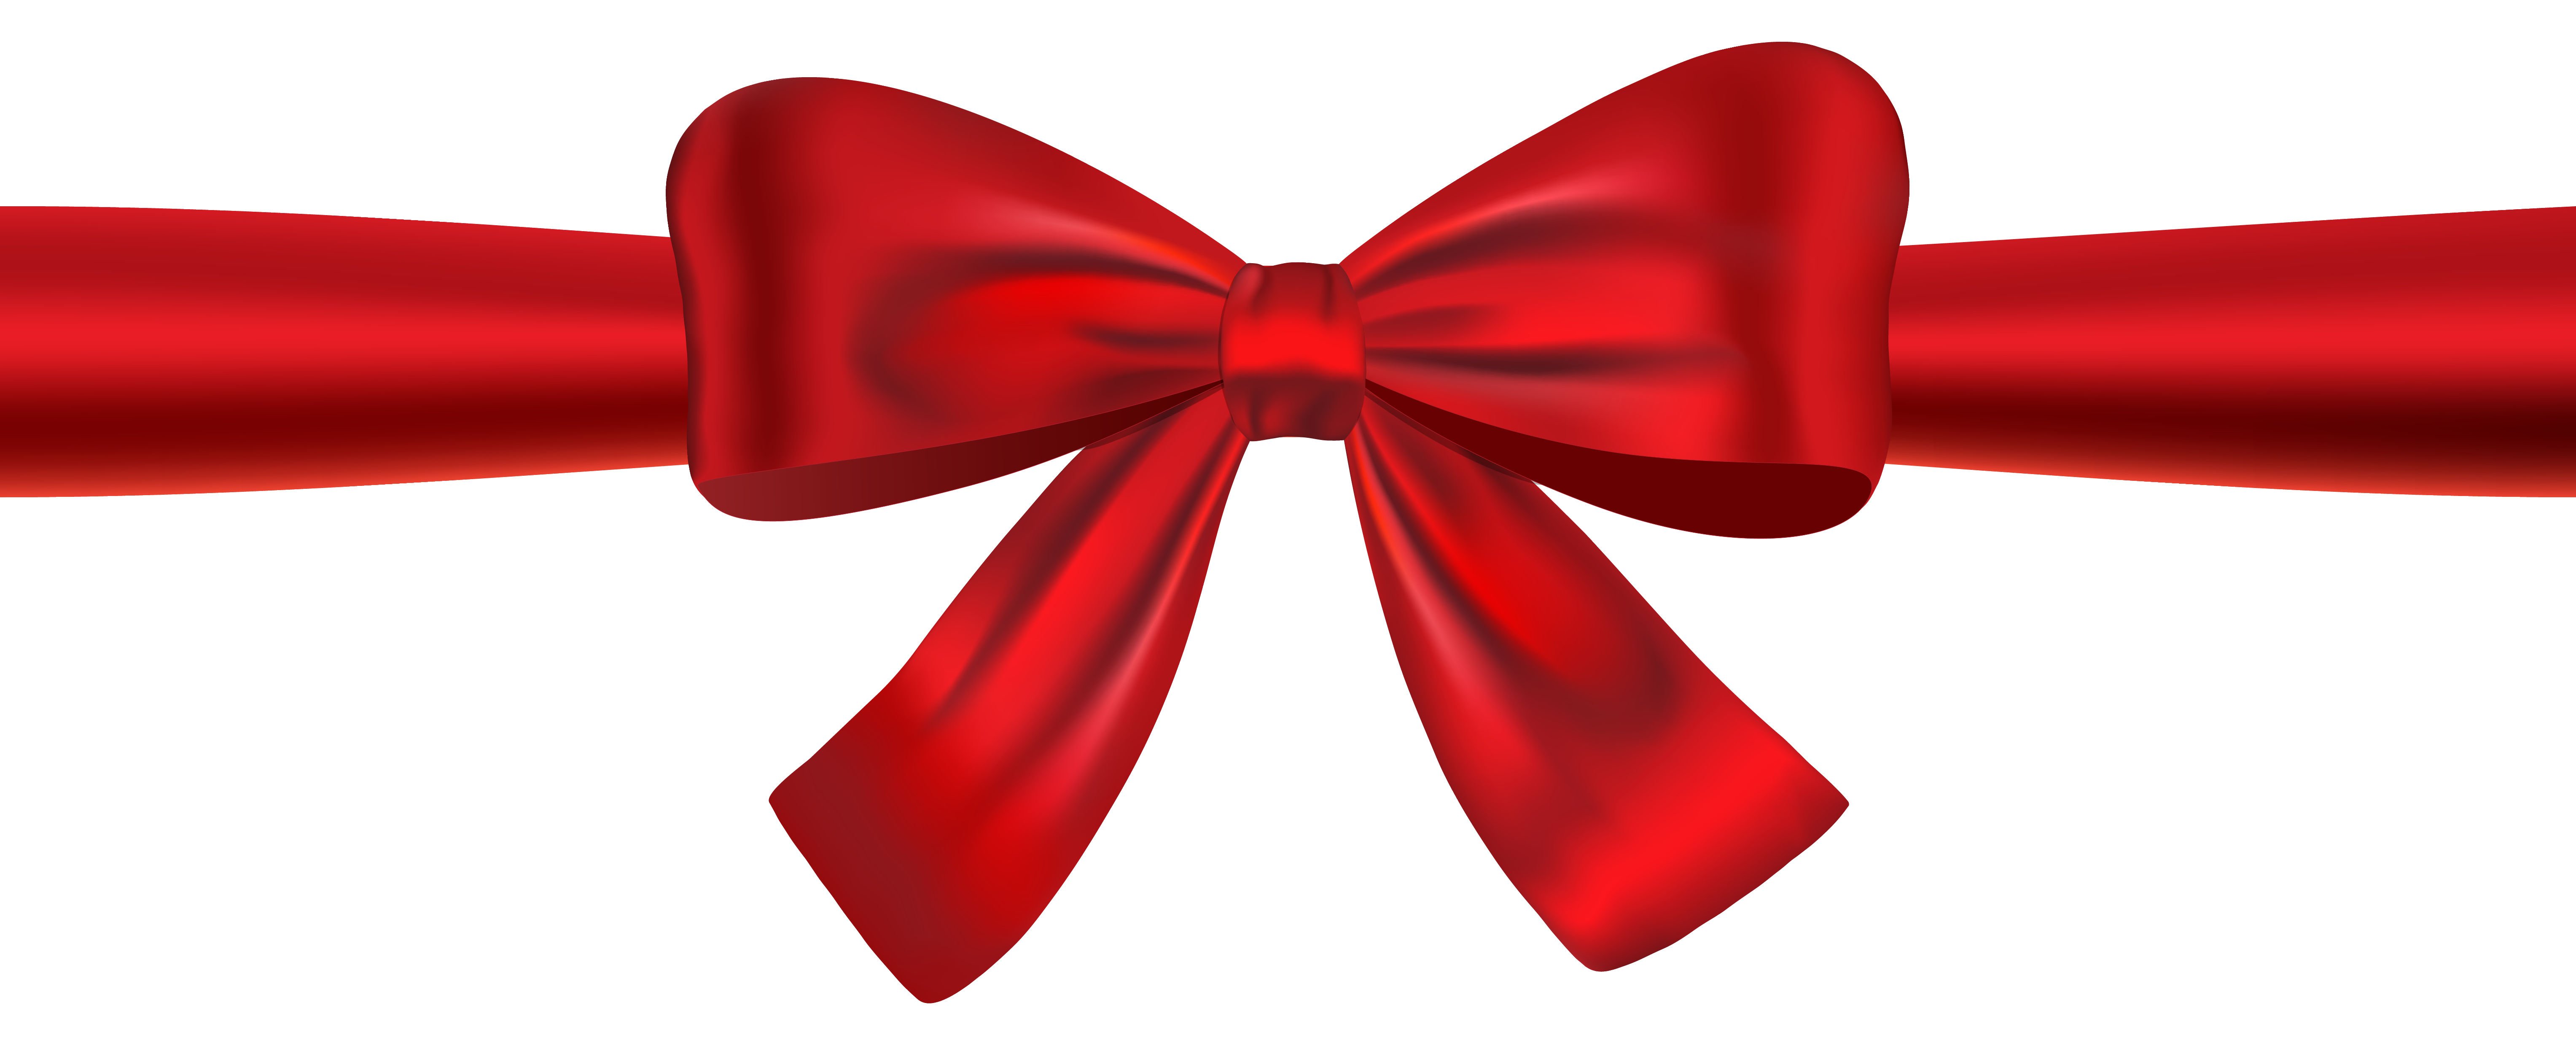 Bow Png Hd Png Image - Tie, Transparent background PNG HD thumbnail